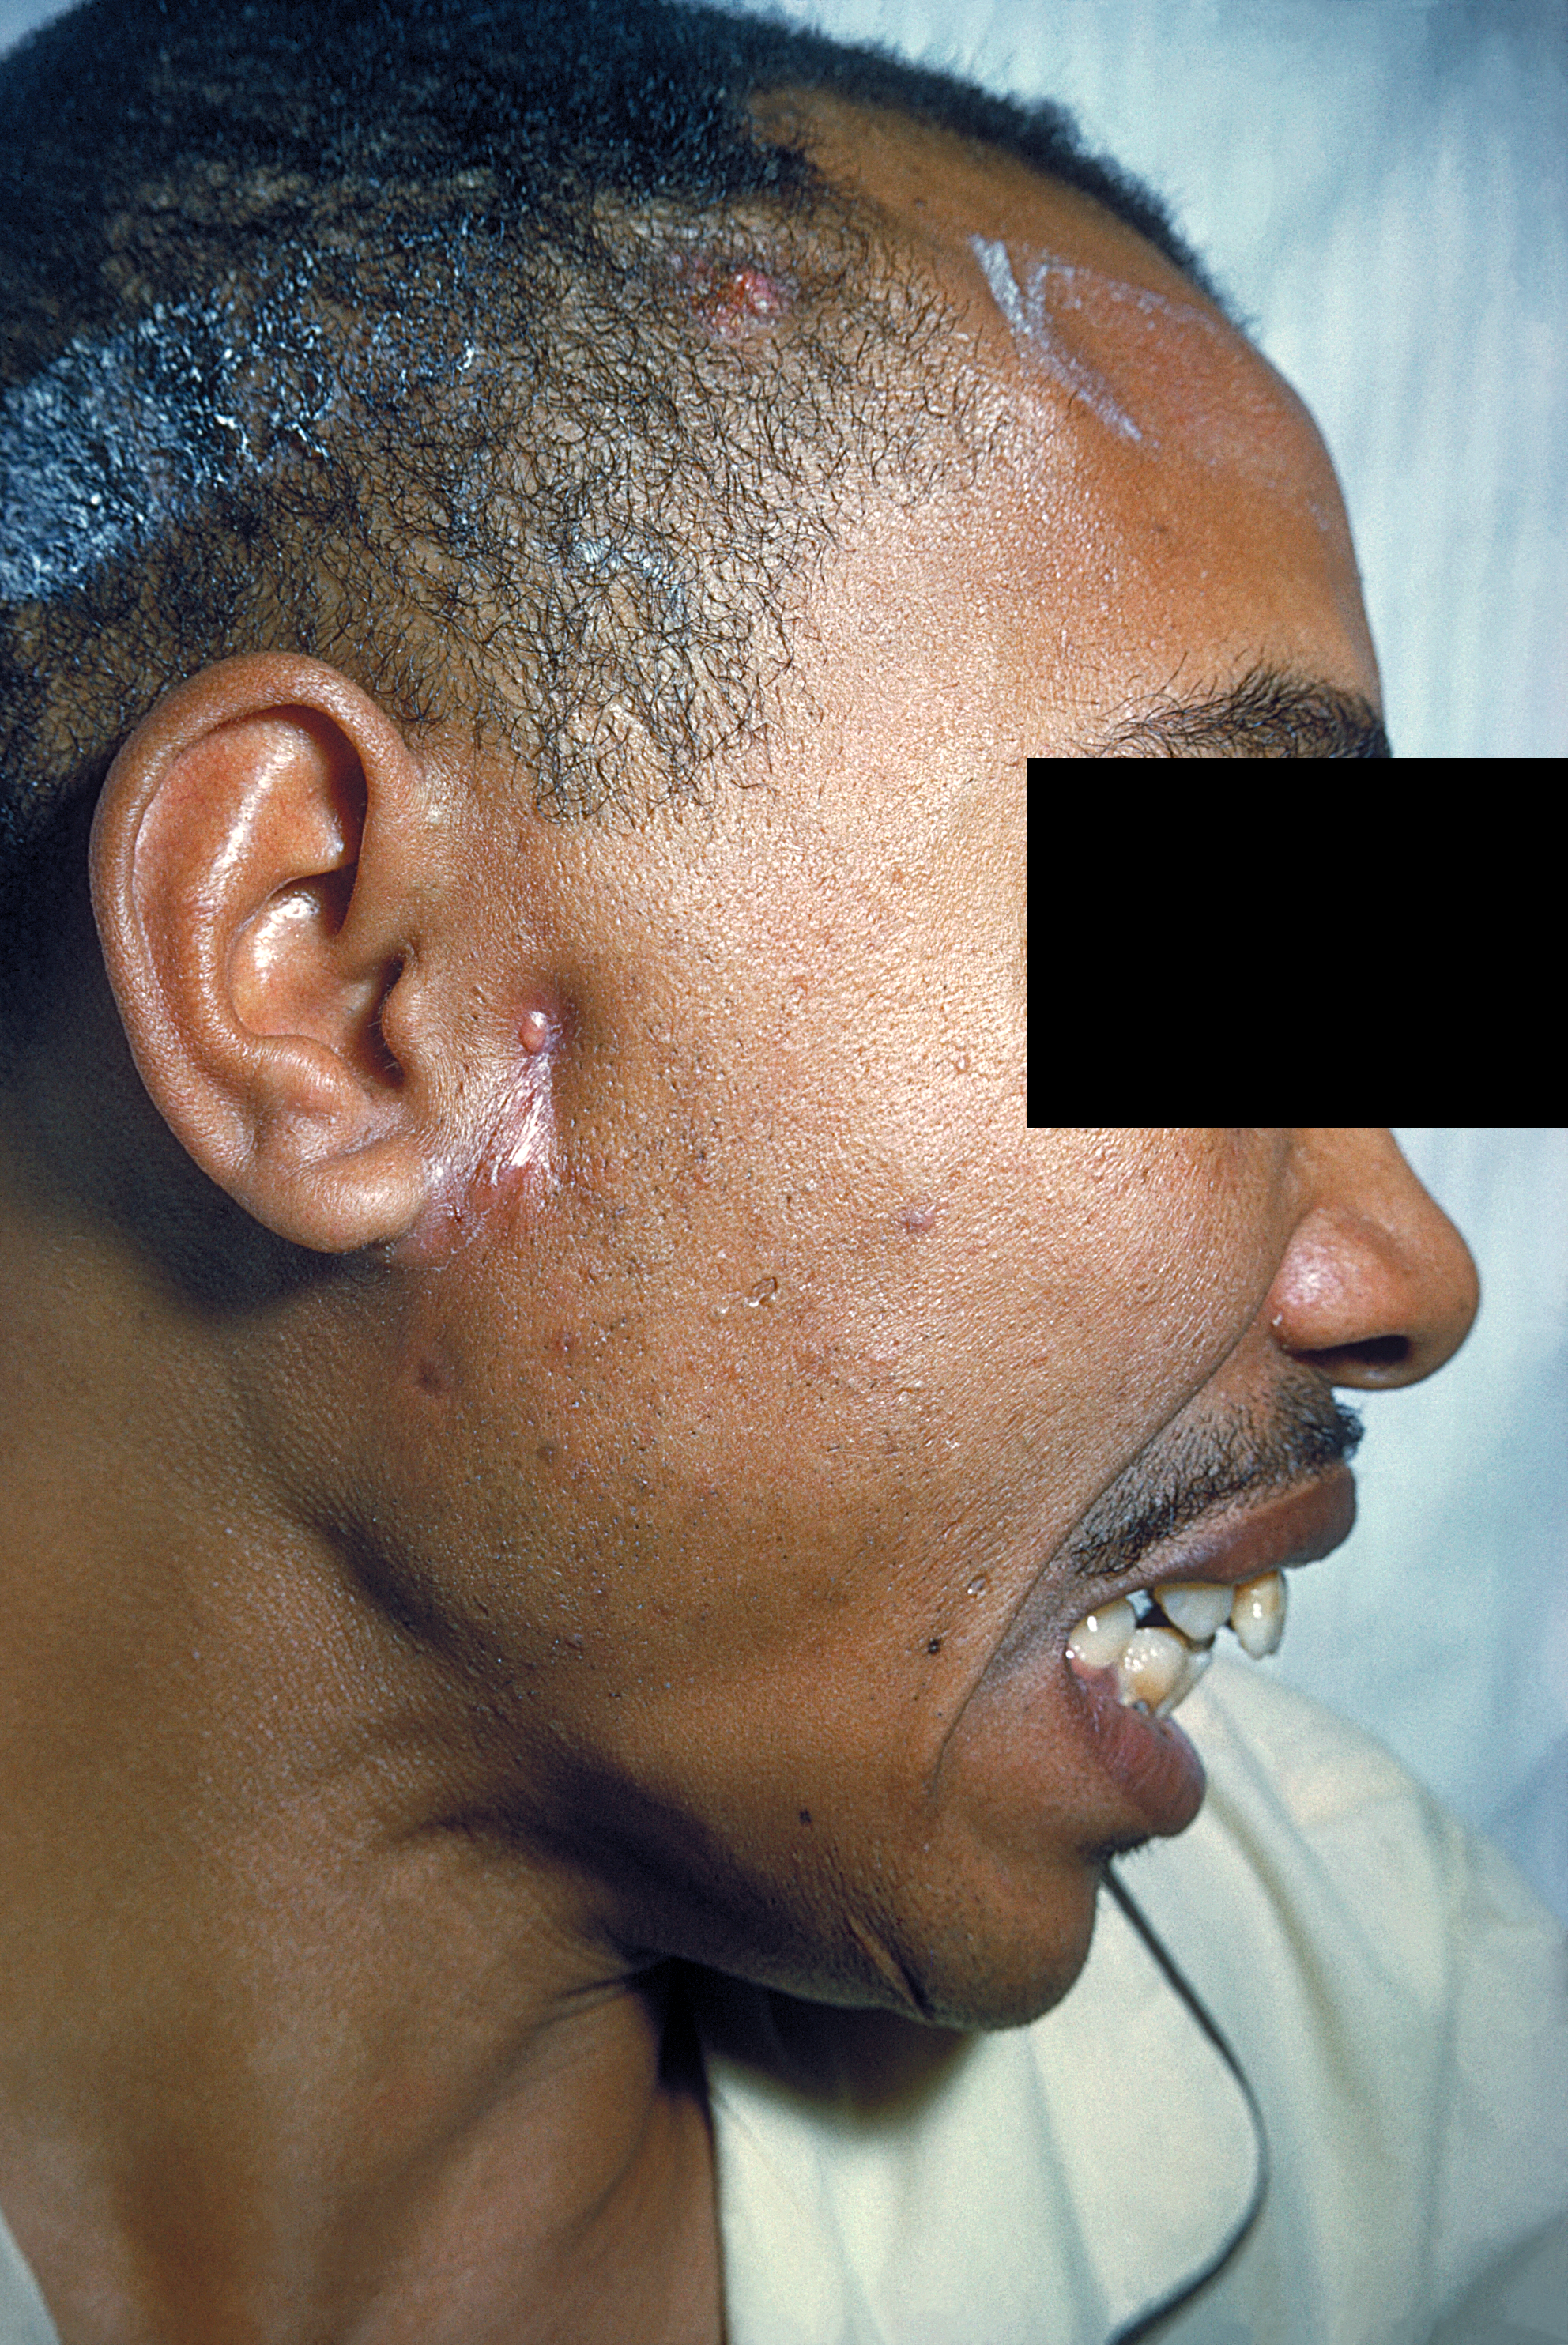 This image depicts a right lateral view of a patient’s head and neck, revealing a cutaneous lesion, just anterior to the right ear, which was determined to be a case of actinomycosis. Actinomyces spp., normally found in the oral cavity, can become an opportunistic pathogen, a situation usually seen only in immunosuppressed patients. Lesions involve long-standing swelling, suppuration and the formation of an abscess or granuloma.